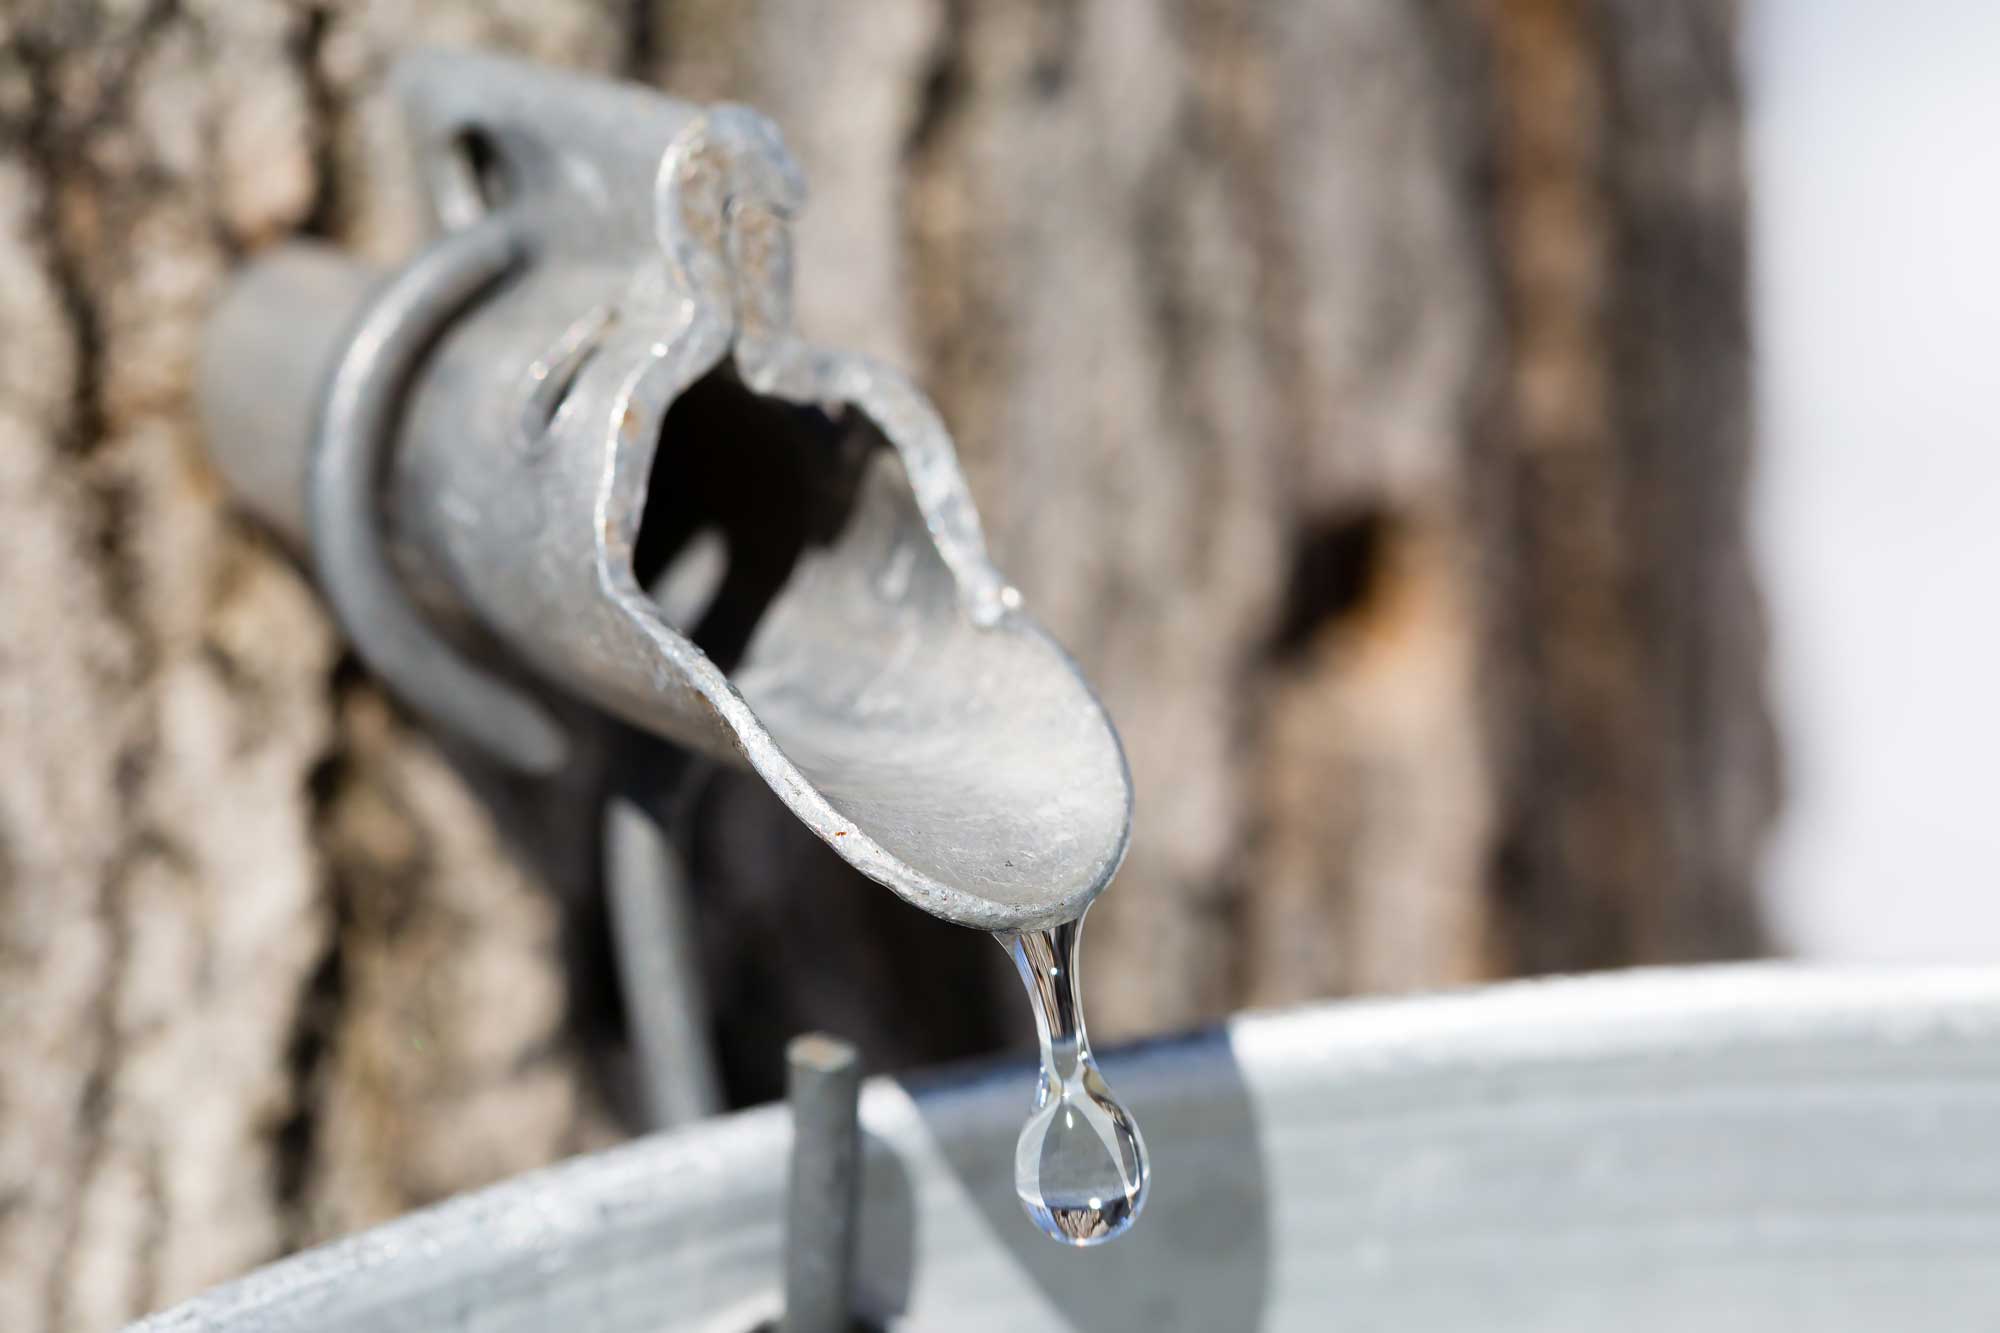 Maple sap dripping from a tap.